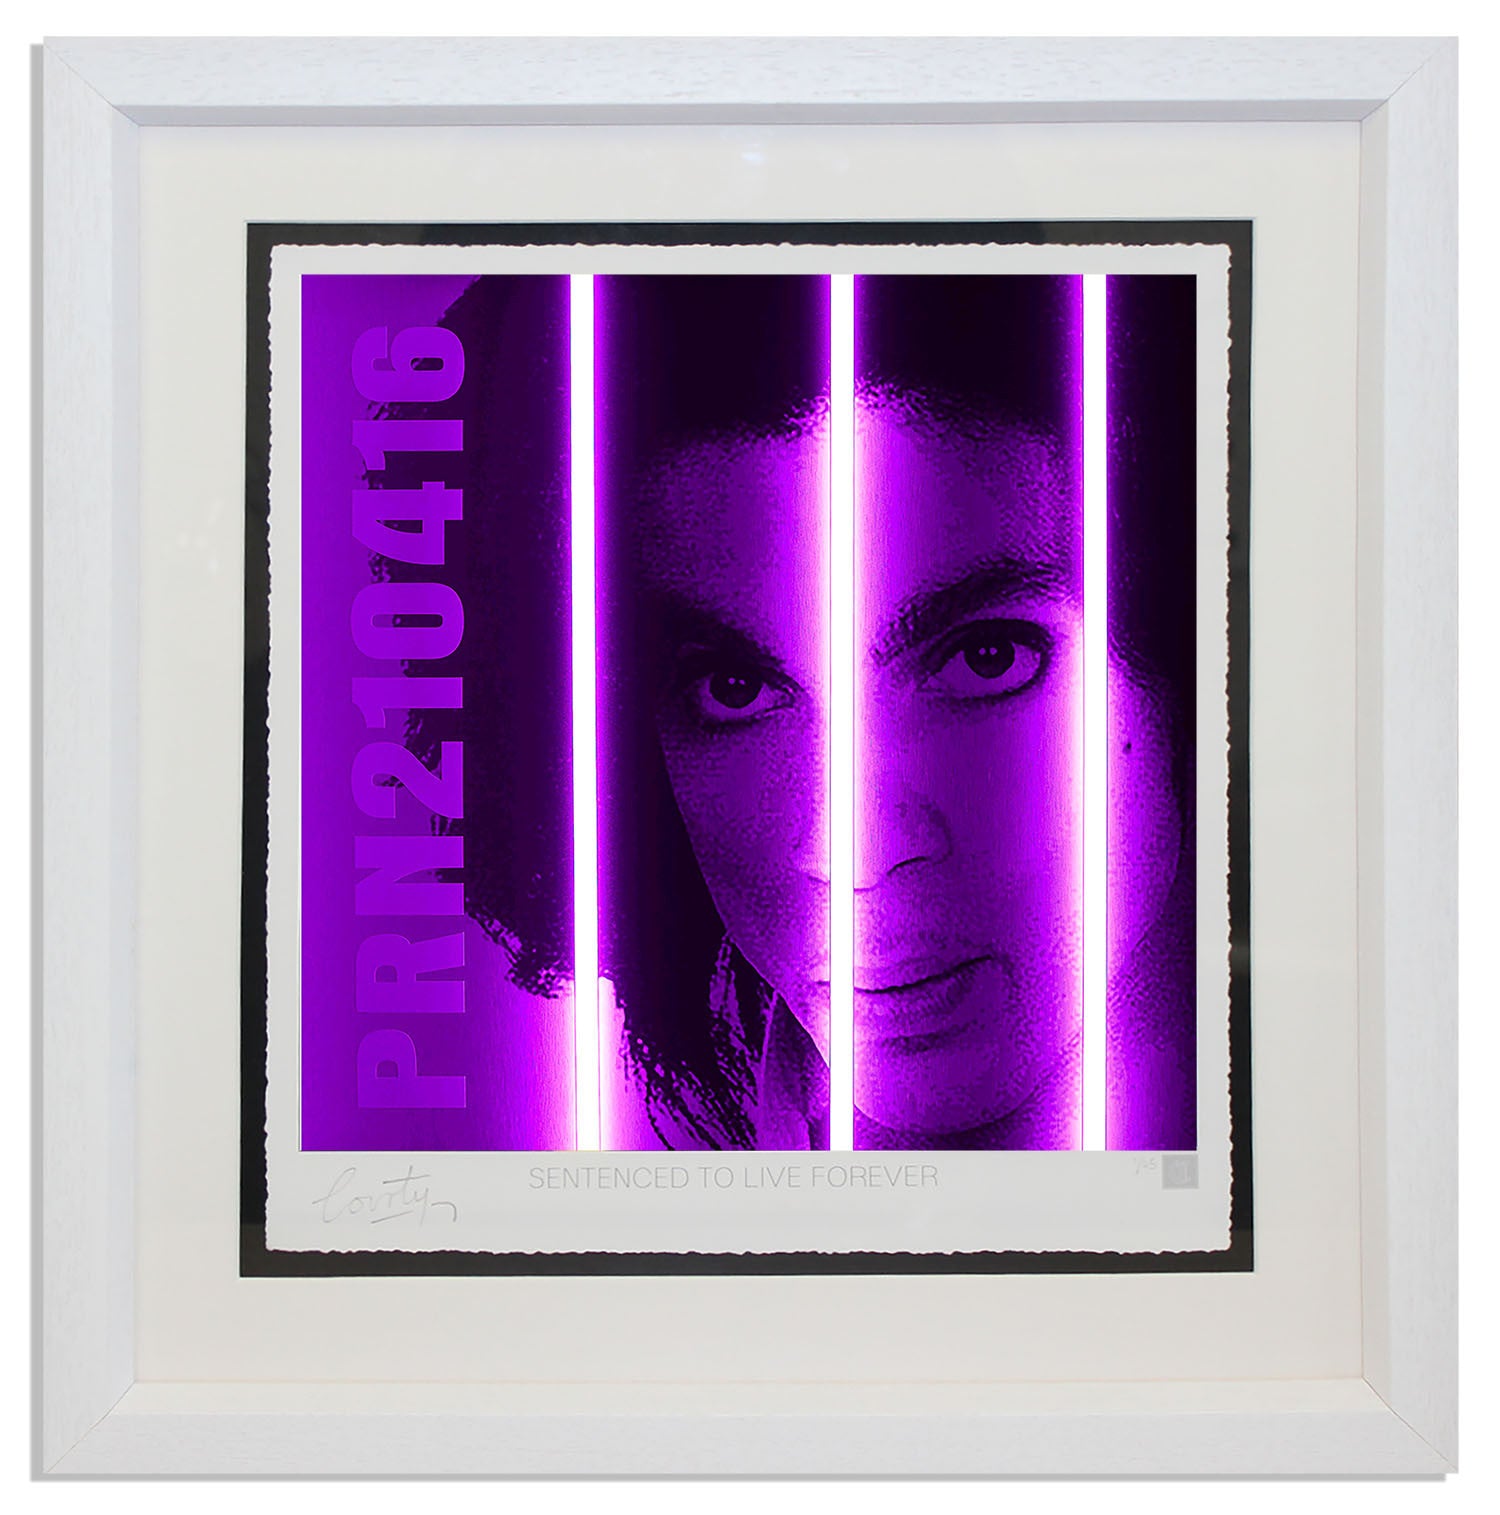 "Prince" by Courty (FRAMED limited edition screen print)